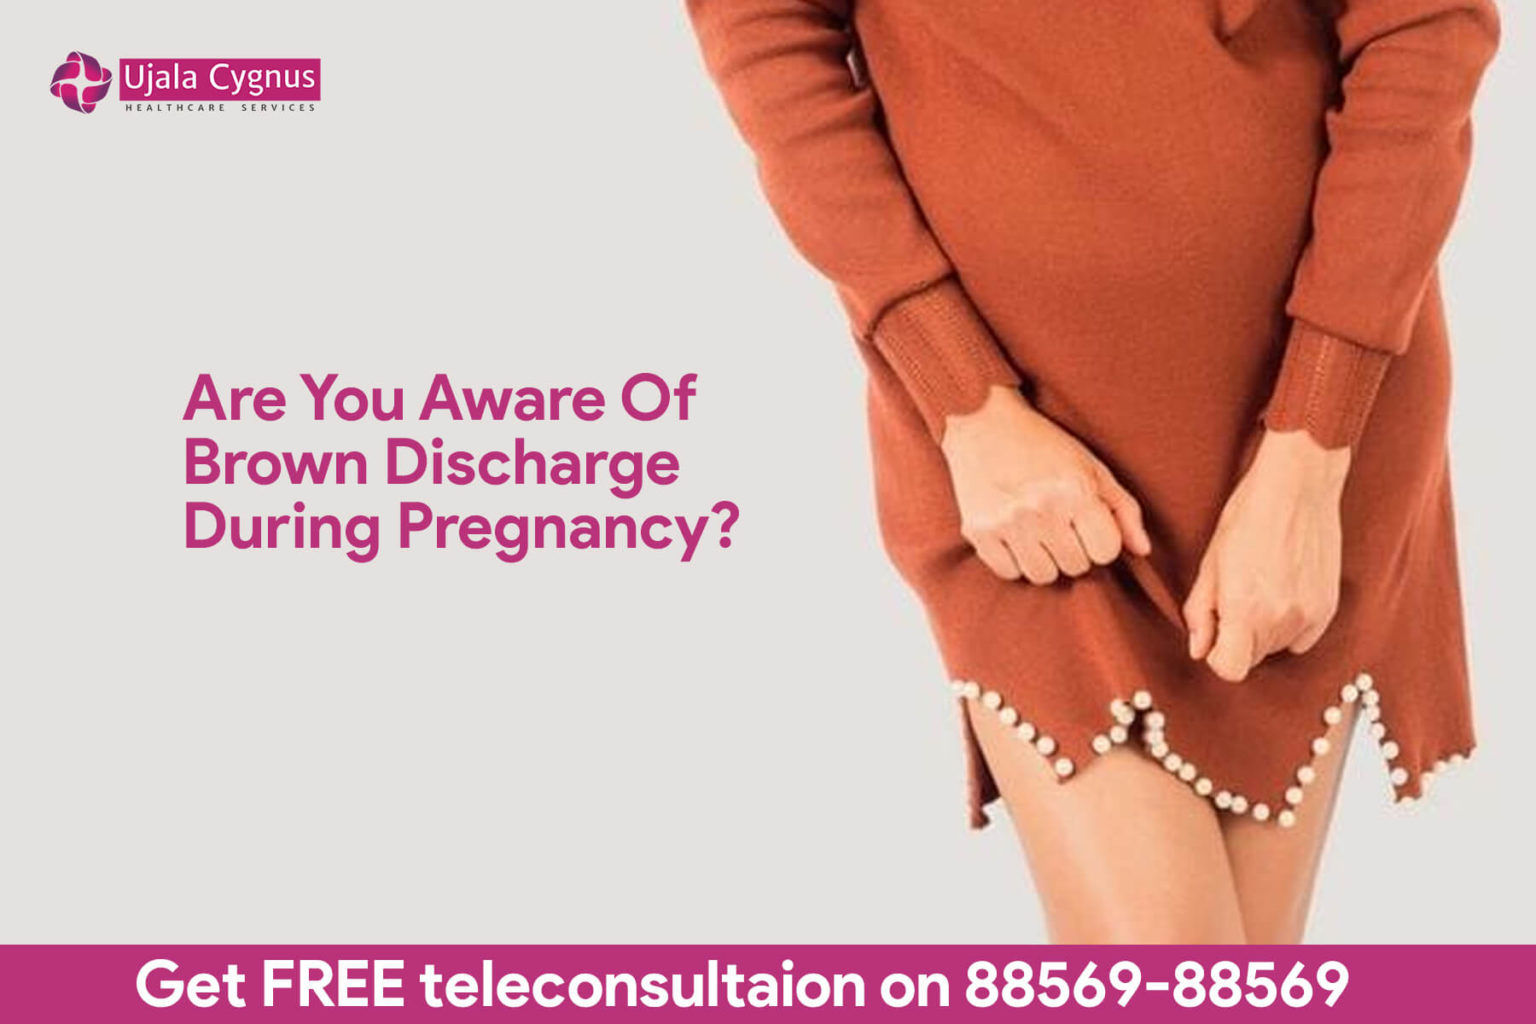 Brown Discharge During Pregnancy: What Does It Mean?